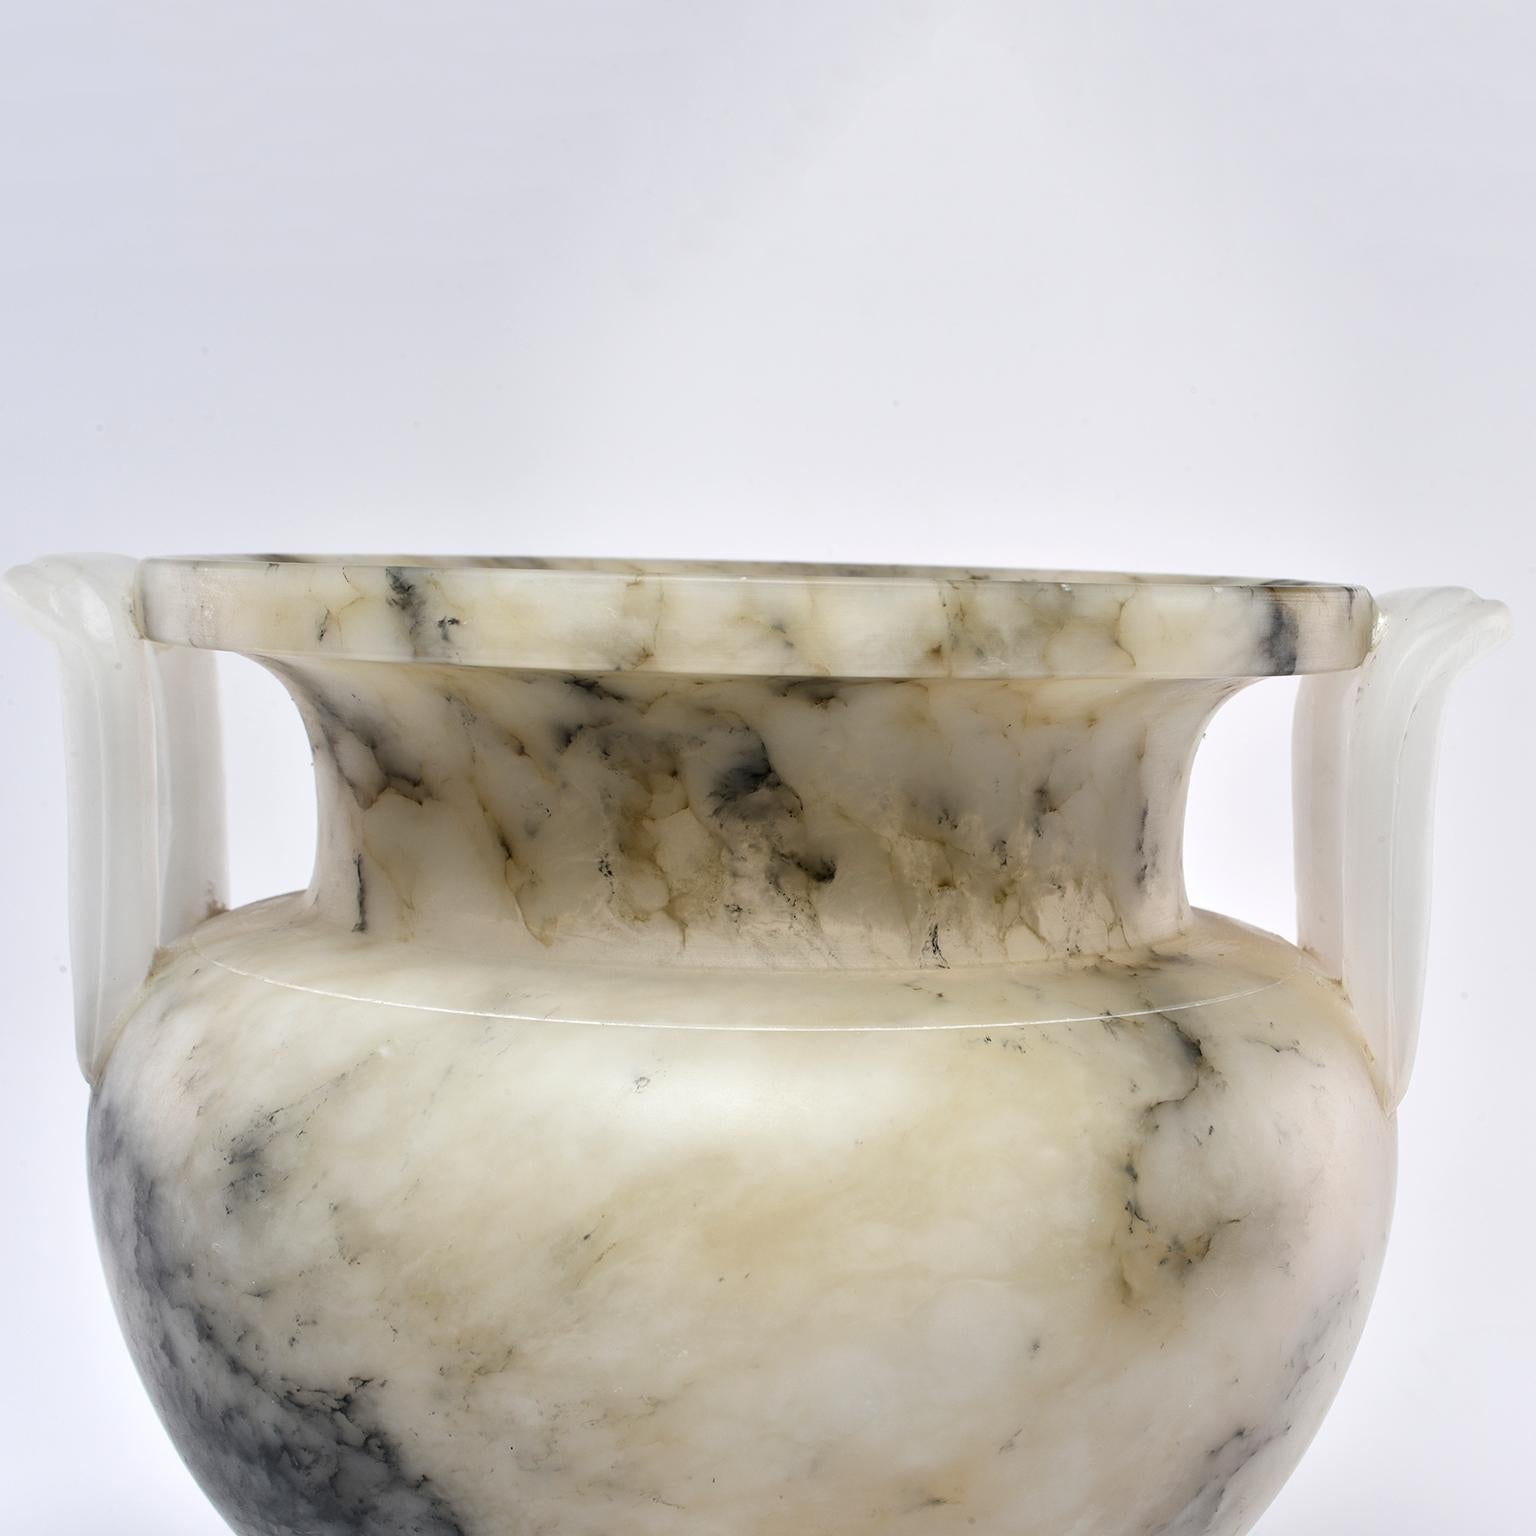 Custom made for us in Italy, this handcrafted alabaster vase is 10